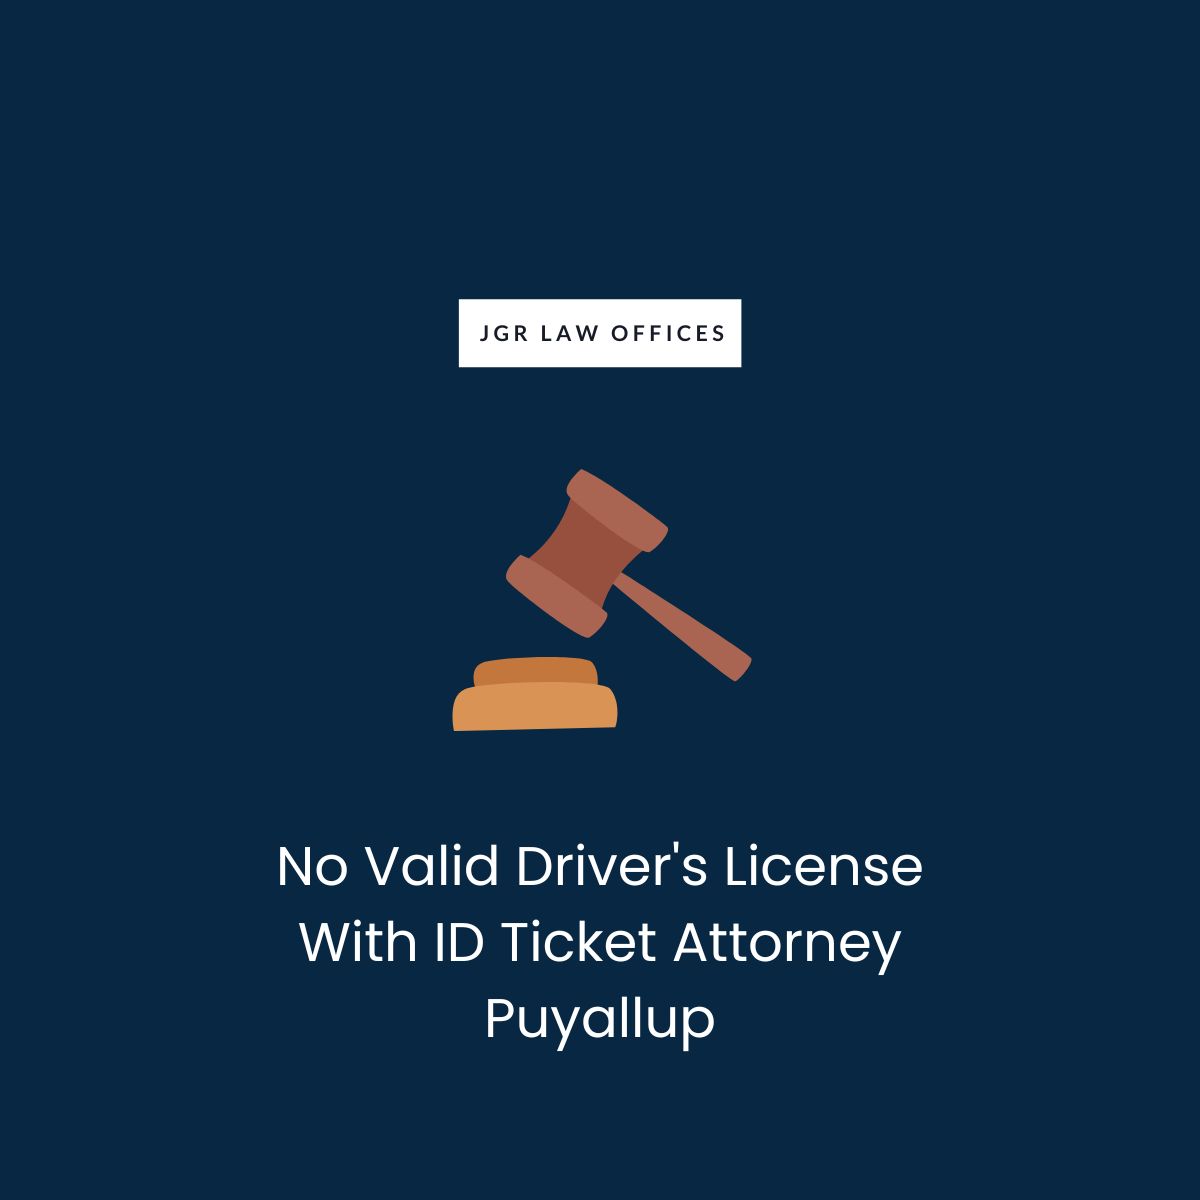 No Valid Driver's License With ID Ticket Attorney Puyallup